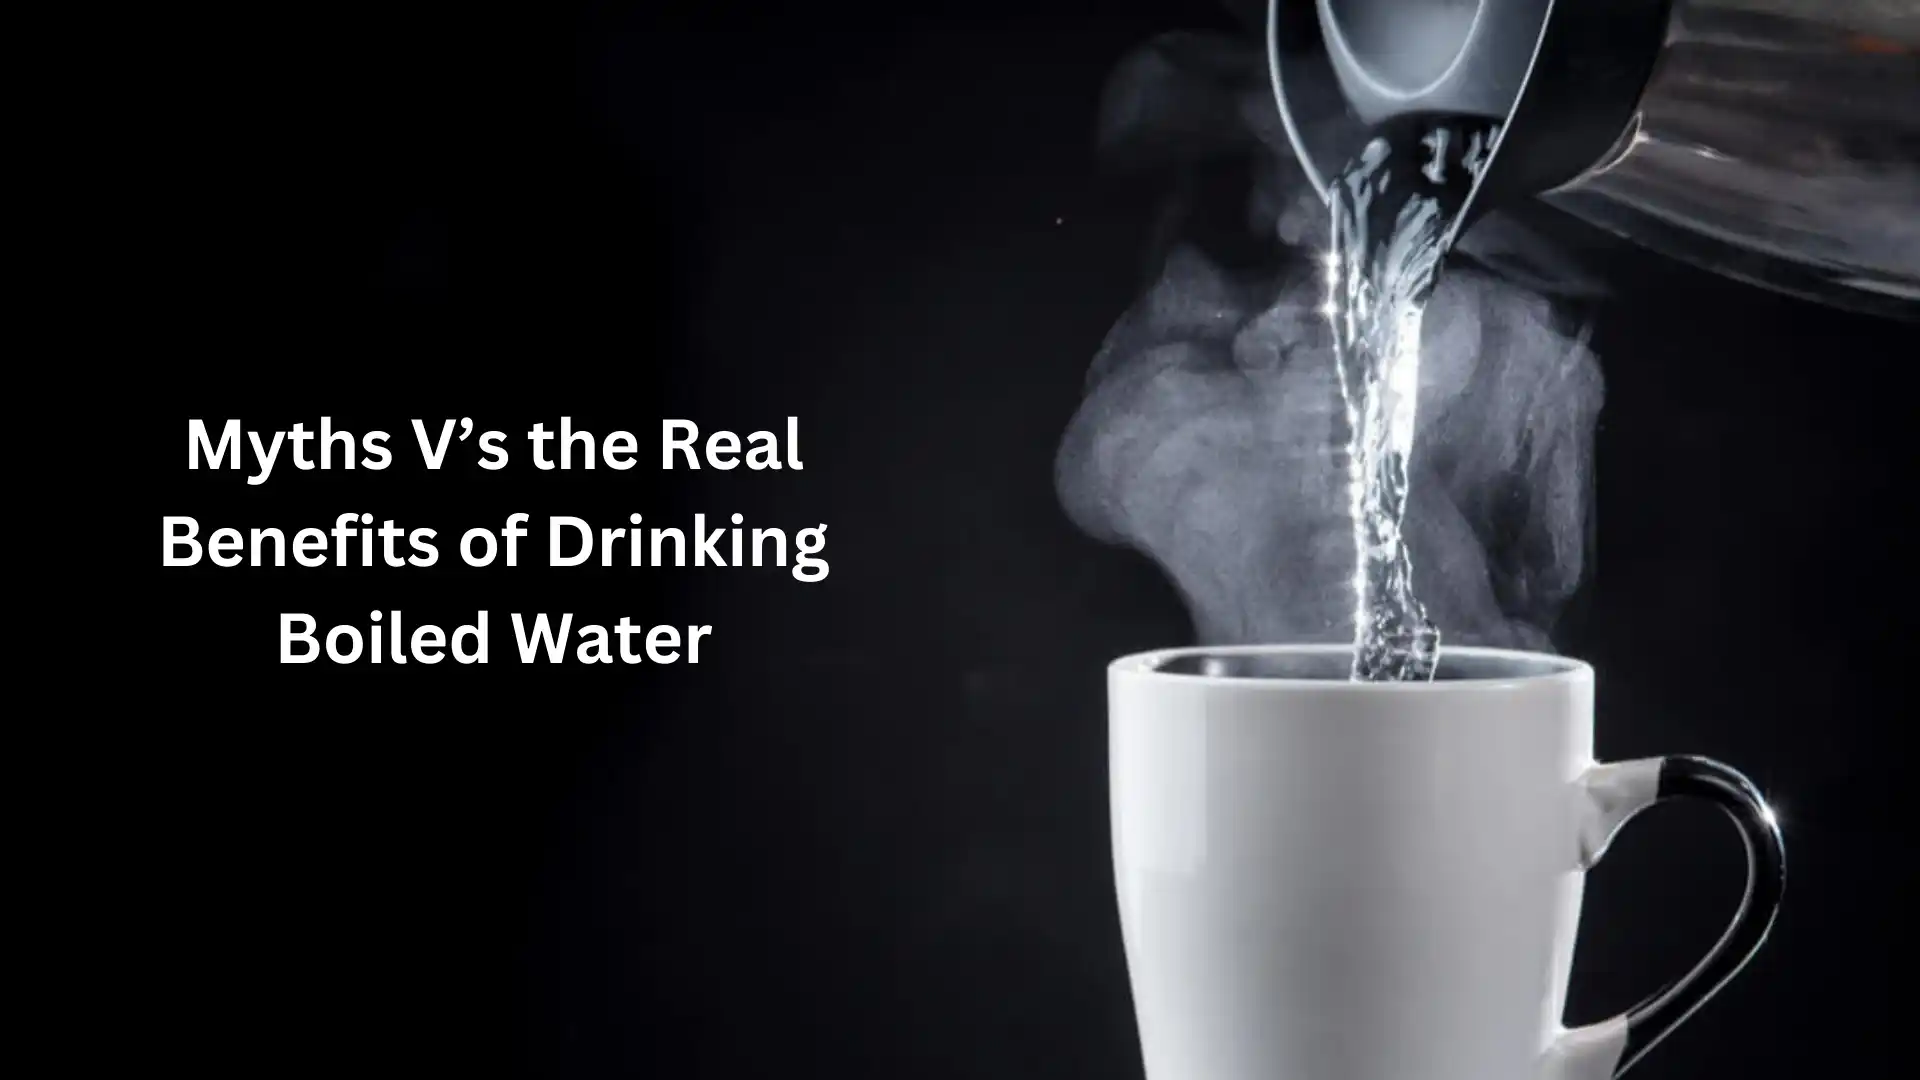 Myths V’s the Real Benefits of Drinking Boiled Water